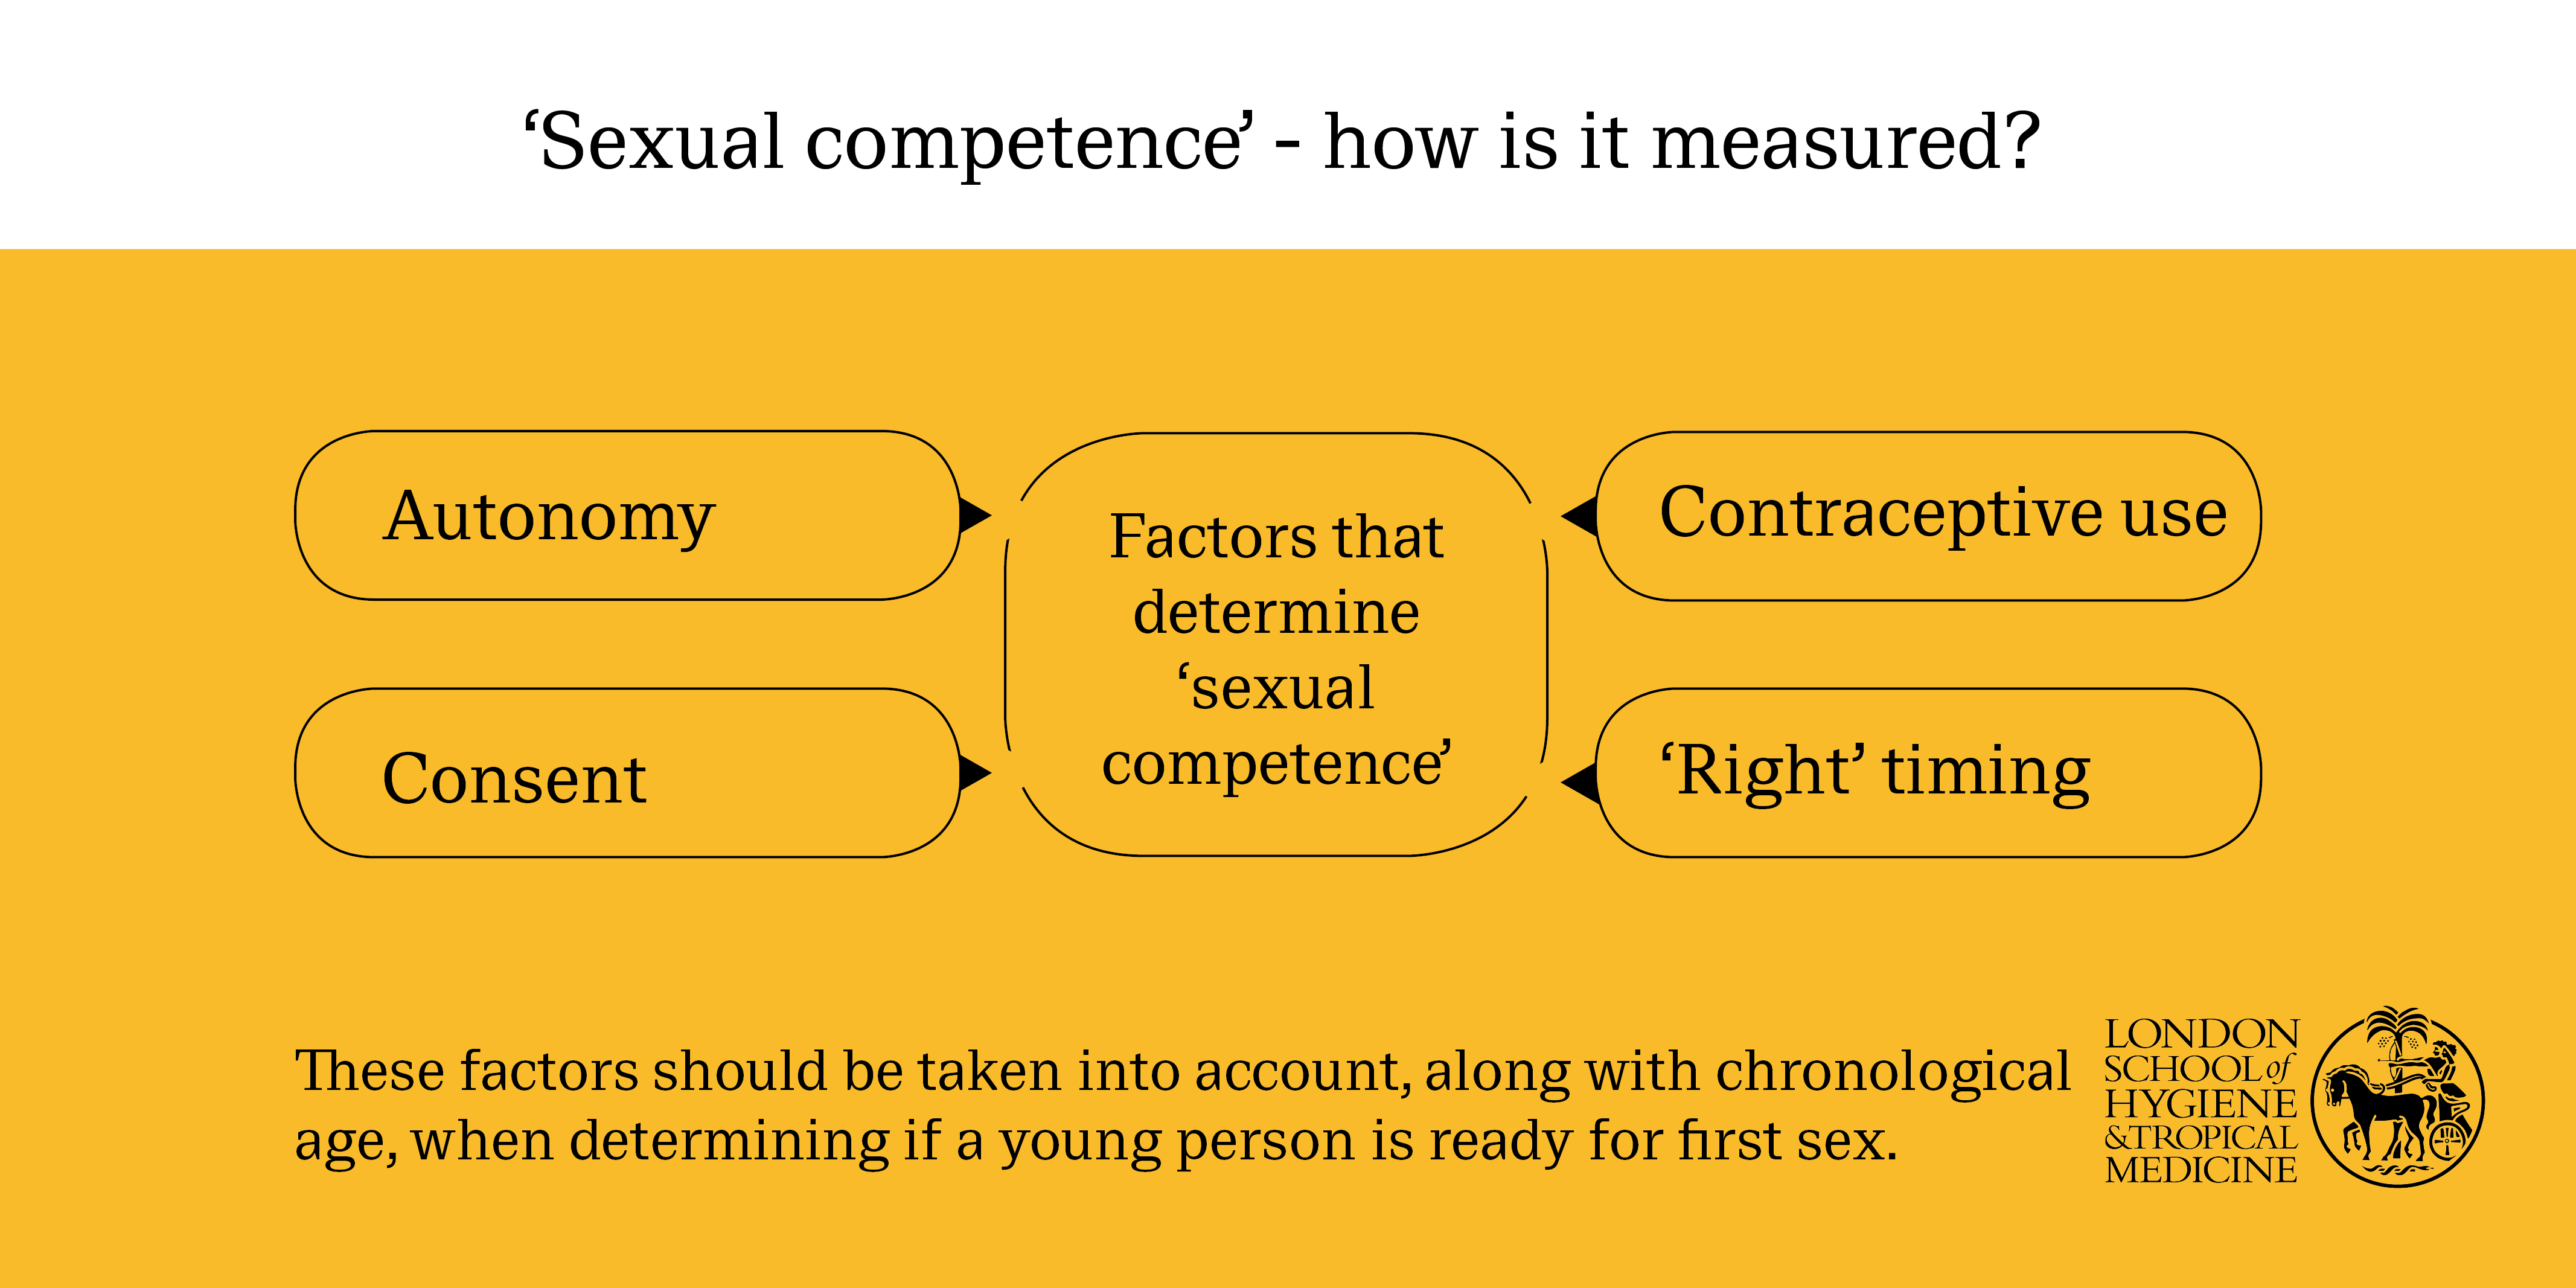 Sexual competence - how is it measured?